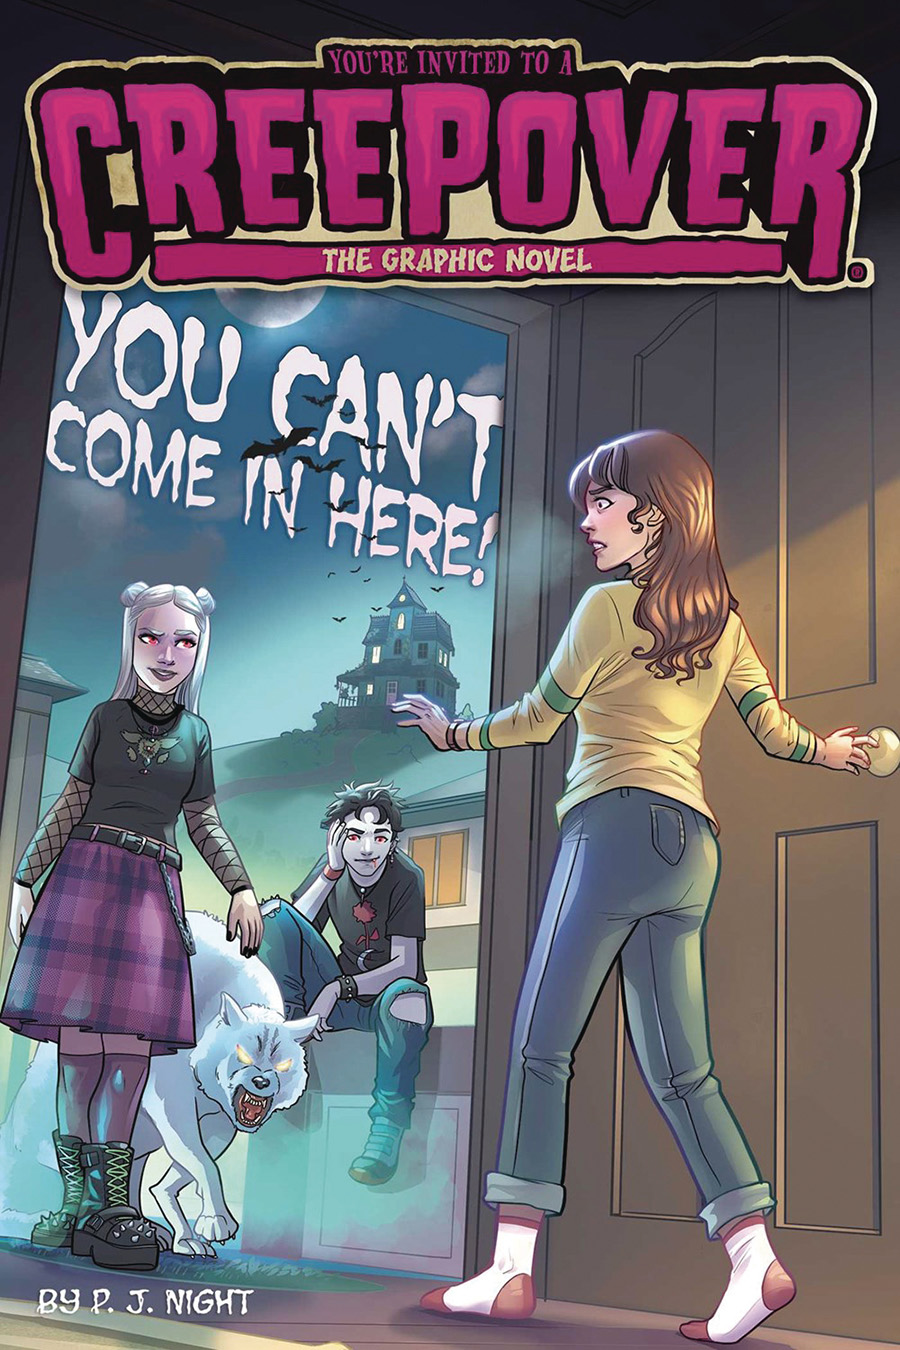 Youre Invited To A Creepover The Graphic Novel Vol 2 You Cant Come In Here TP